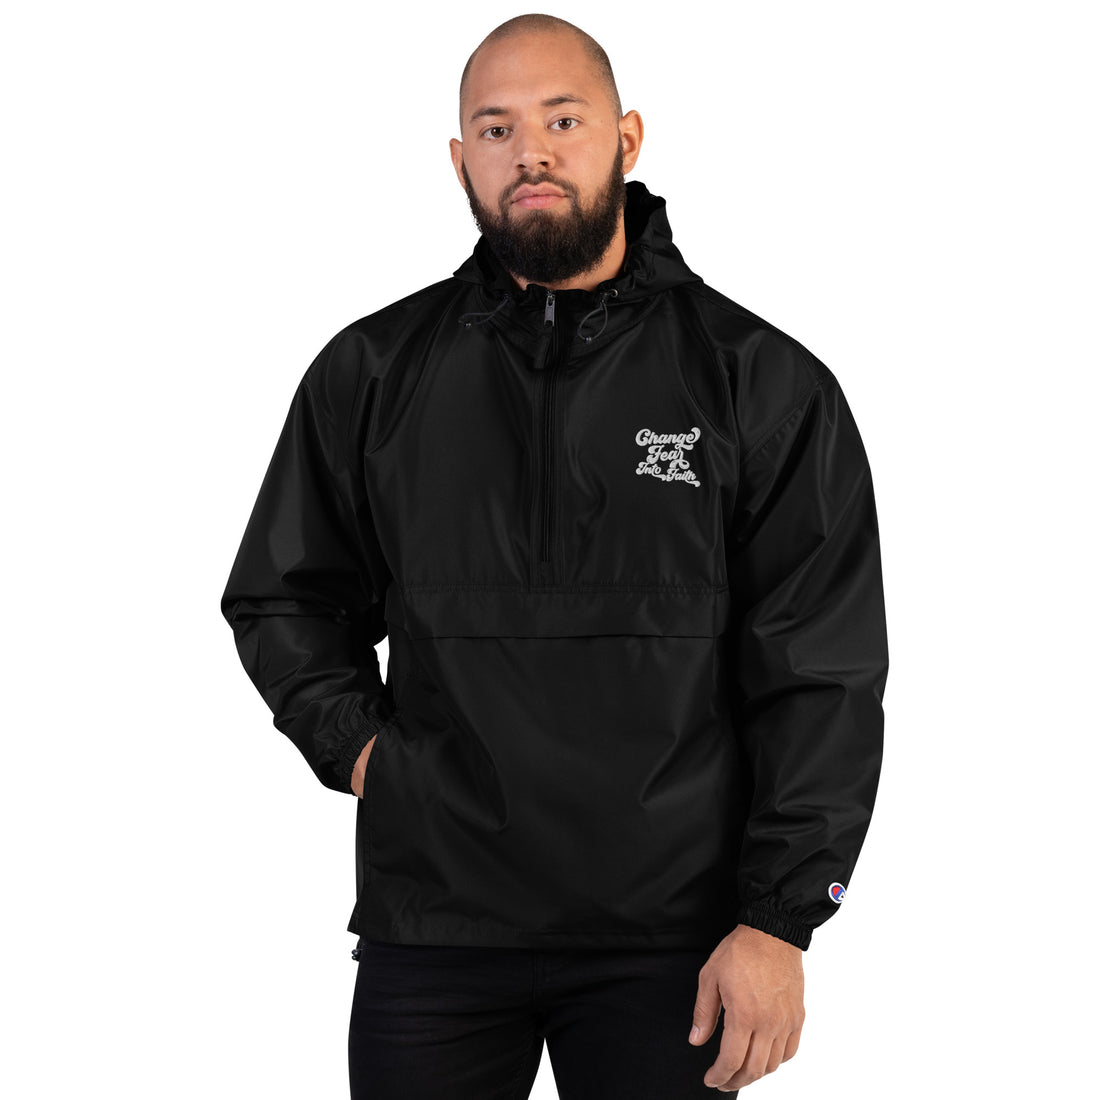 C.F.I.F Embroidered Champion Packable Jacket